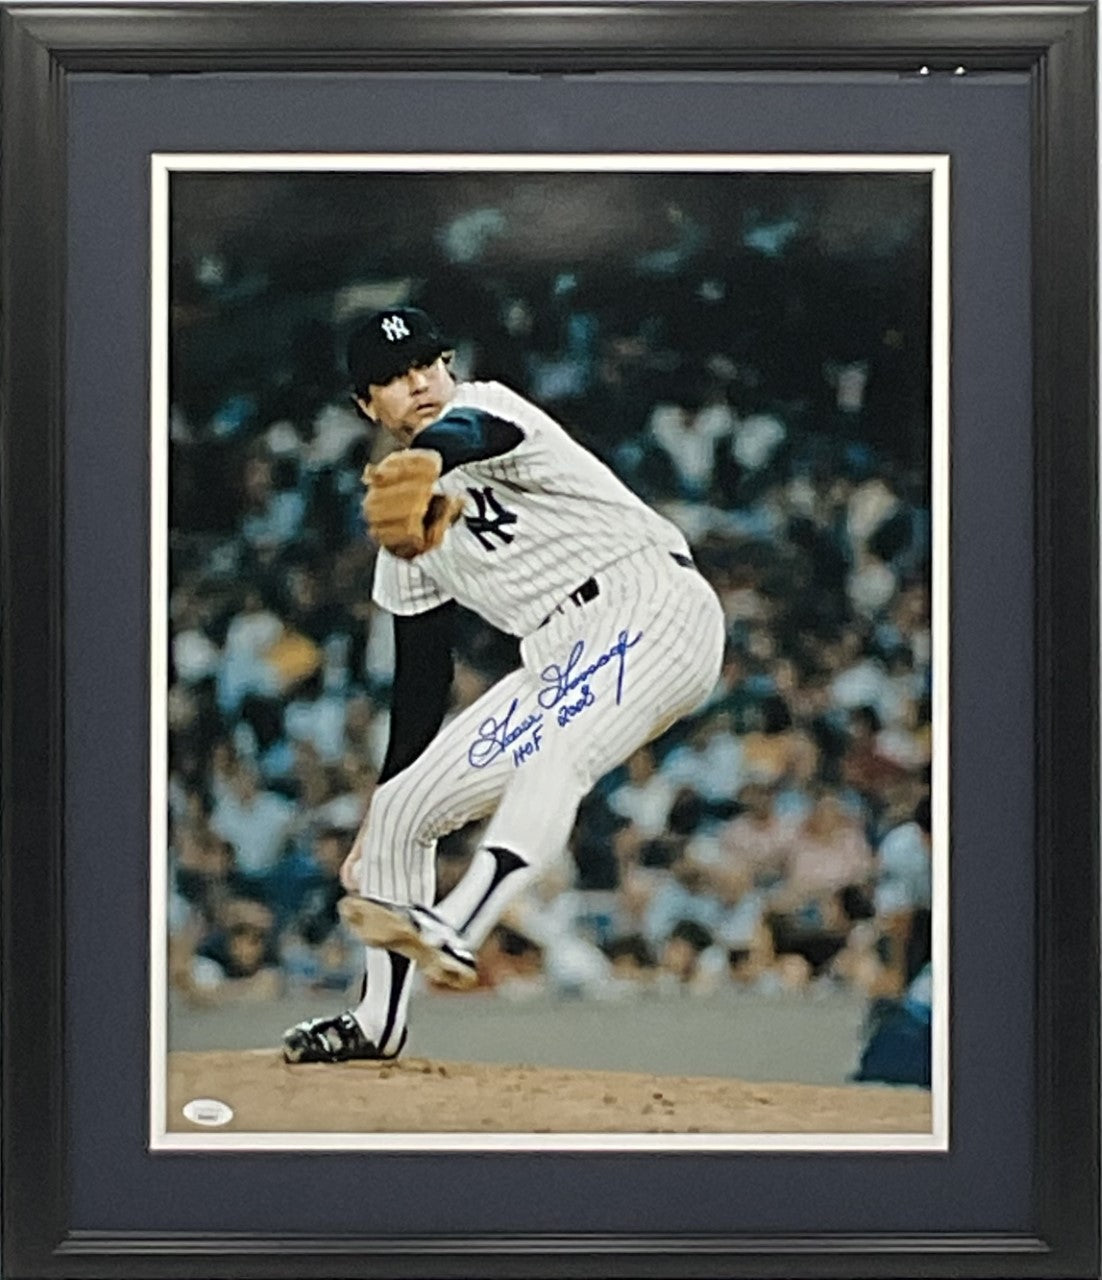 Goose Gossage Autographed 16x20 New York Yankees Photo Framed